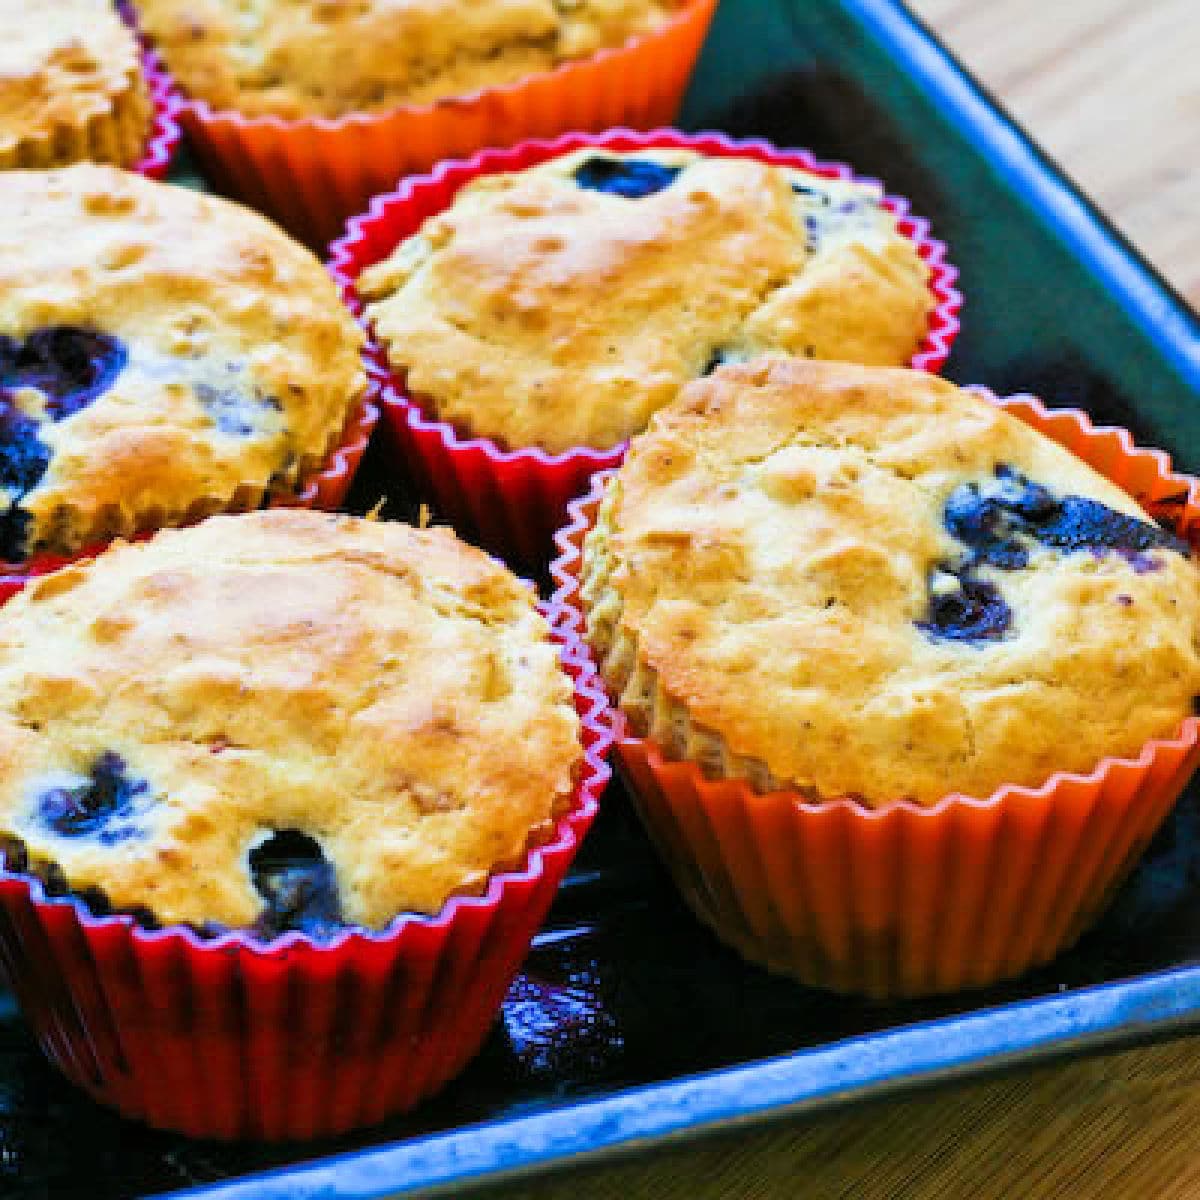 Low-Sugar Blueberry Muffins shown in muffin baking cups on baking sheet.